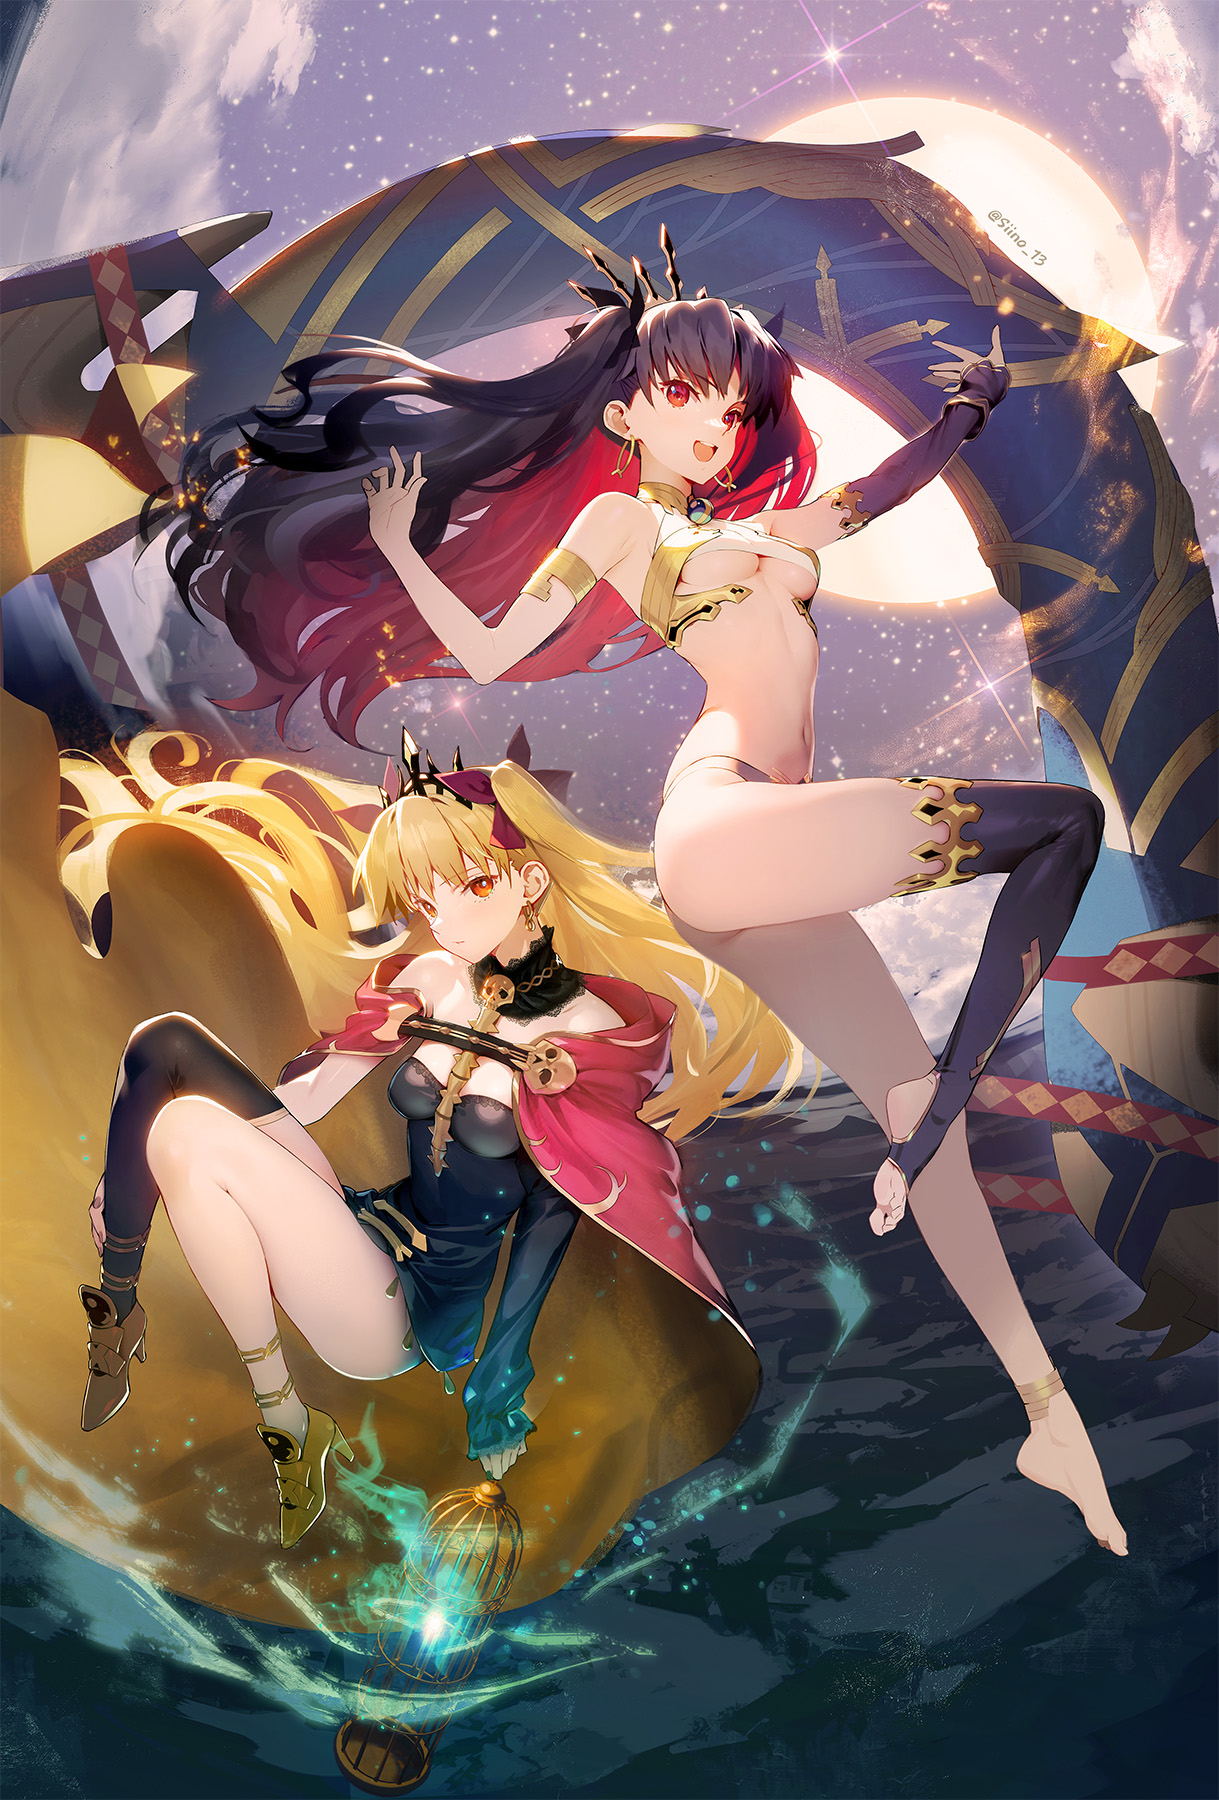 Anime 1219x1800 Fate series two women portrait display water Ereshkigal (Fate/Grand Order) Ishtar (Fate/Grand Order) missing stocking Moon looking at viewer thighs stars women outdoors long hair hair ornament full moon high heels Siino cages tiaras starred sky starry night boobs cape night anime girls skinny Fate/Grand Order anime